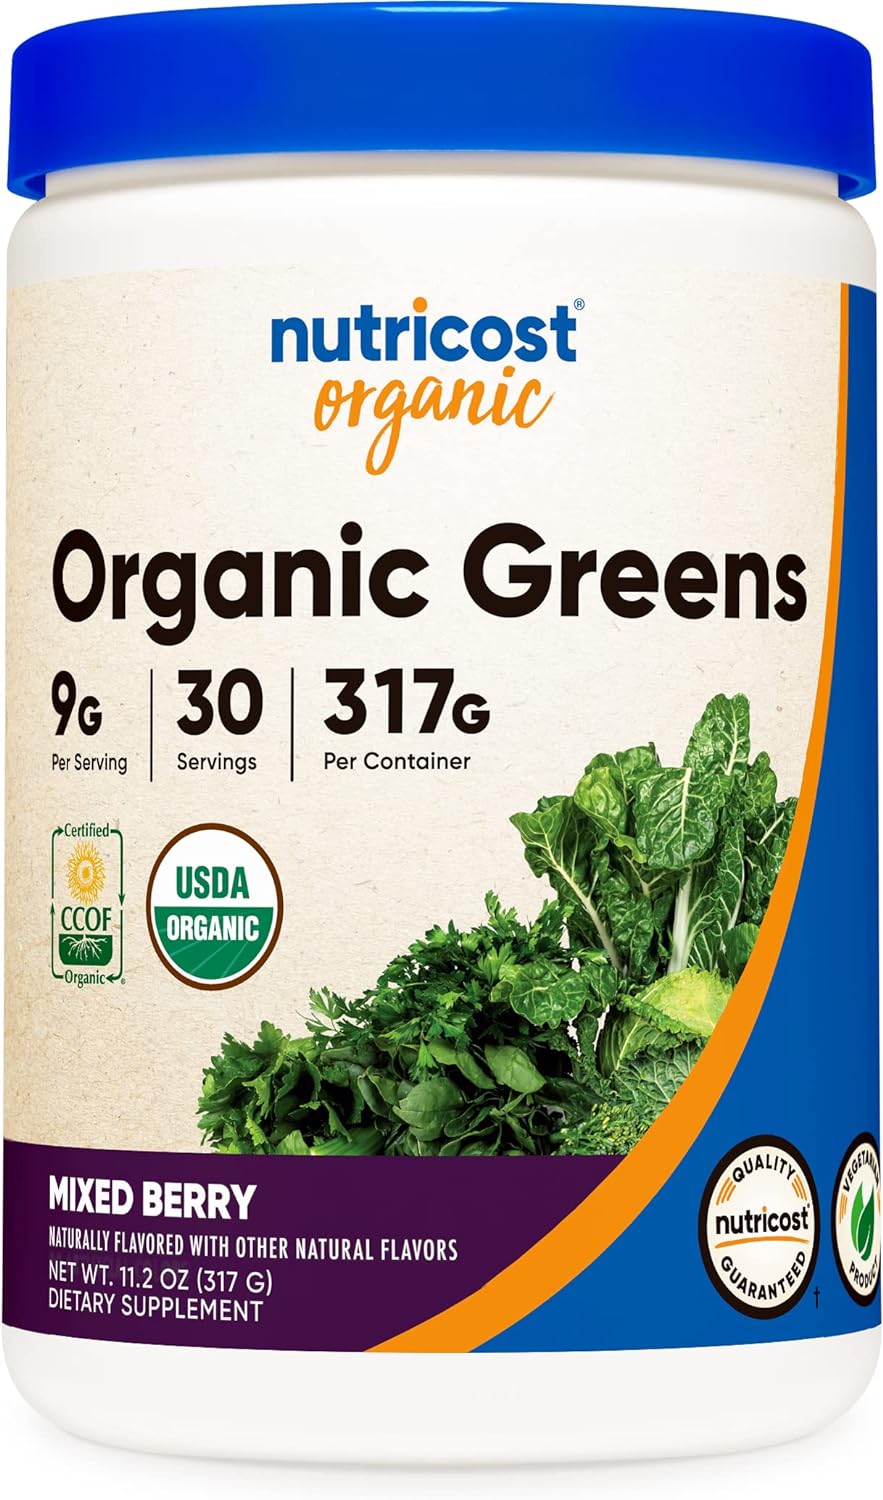 Nutricost Organic Greens Powder (Mixed Berry) 30 Servings - Superfood Powder, Certified USDA Organic